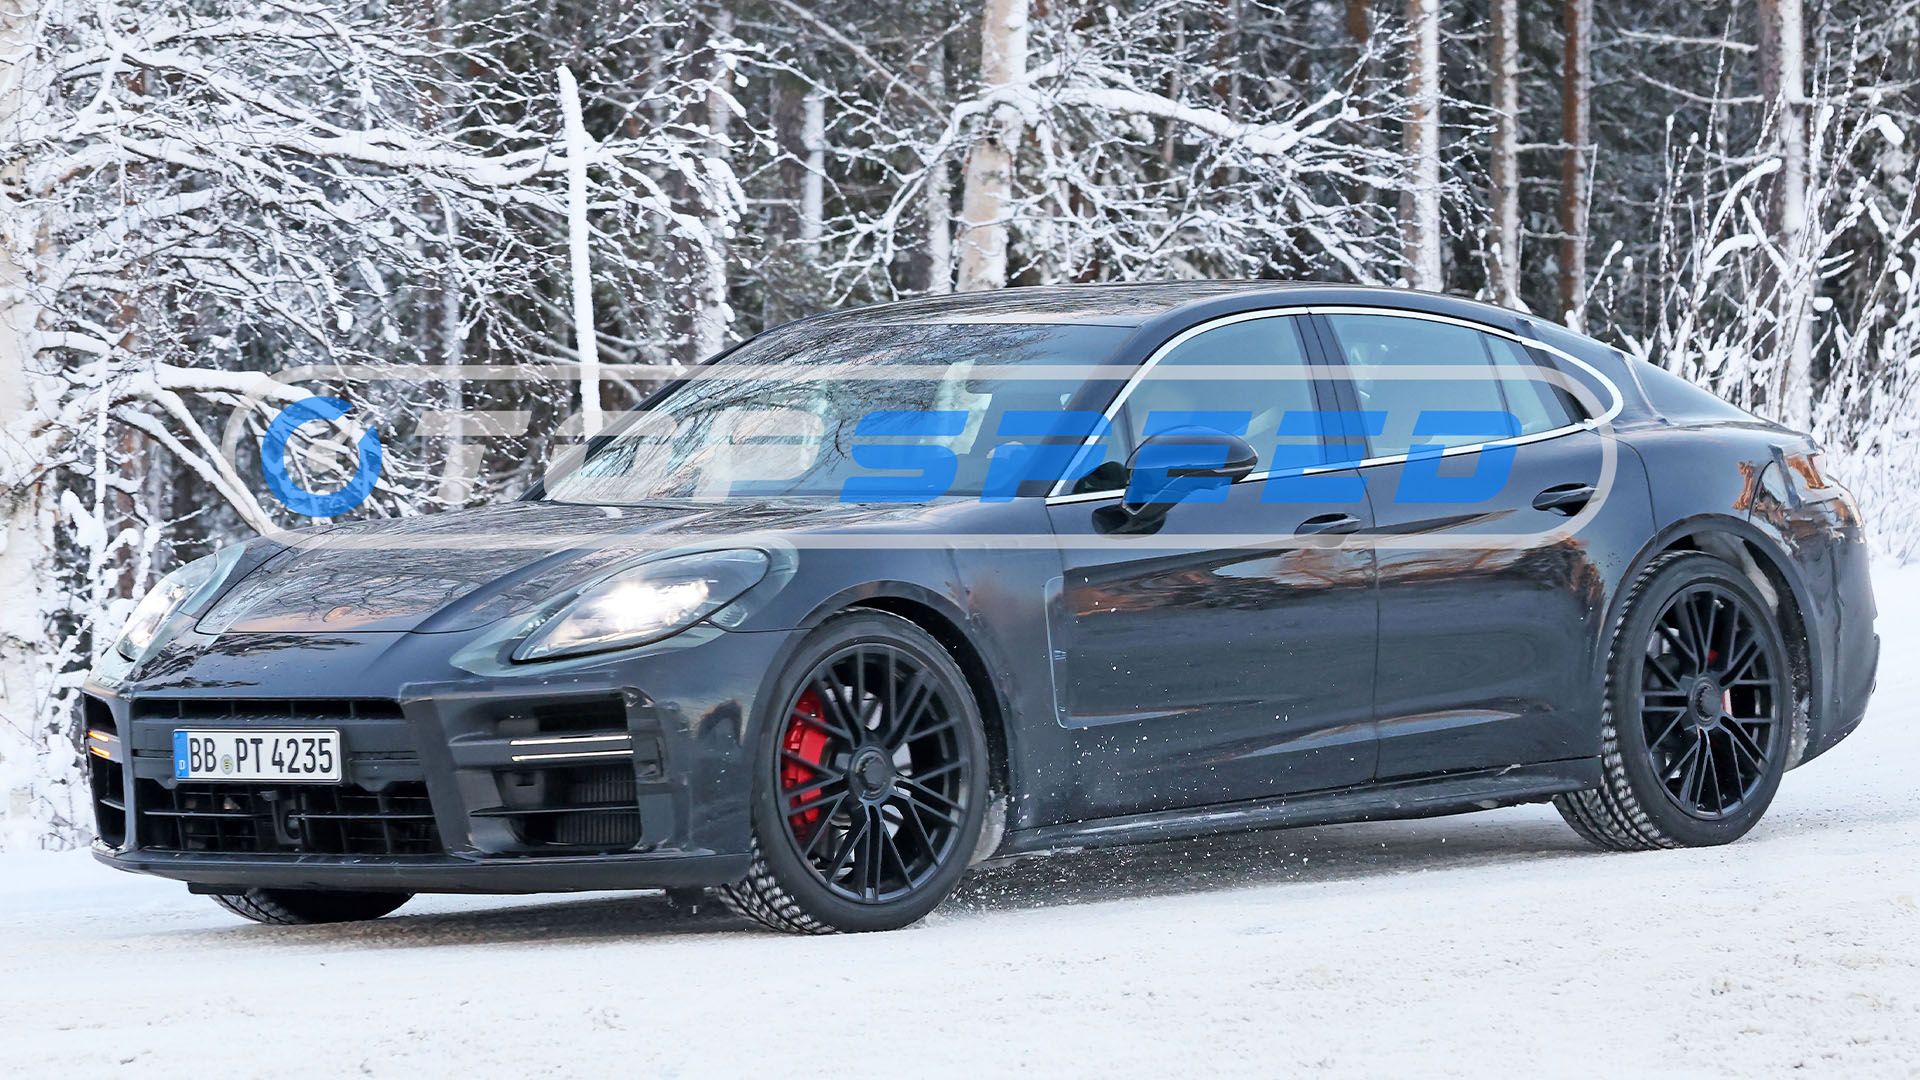 These Spy Shots Just Exposed The New HighPerformance Porsche Panamera